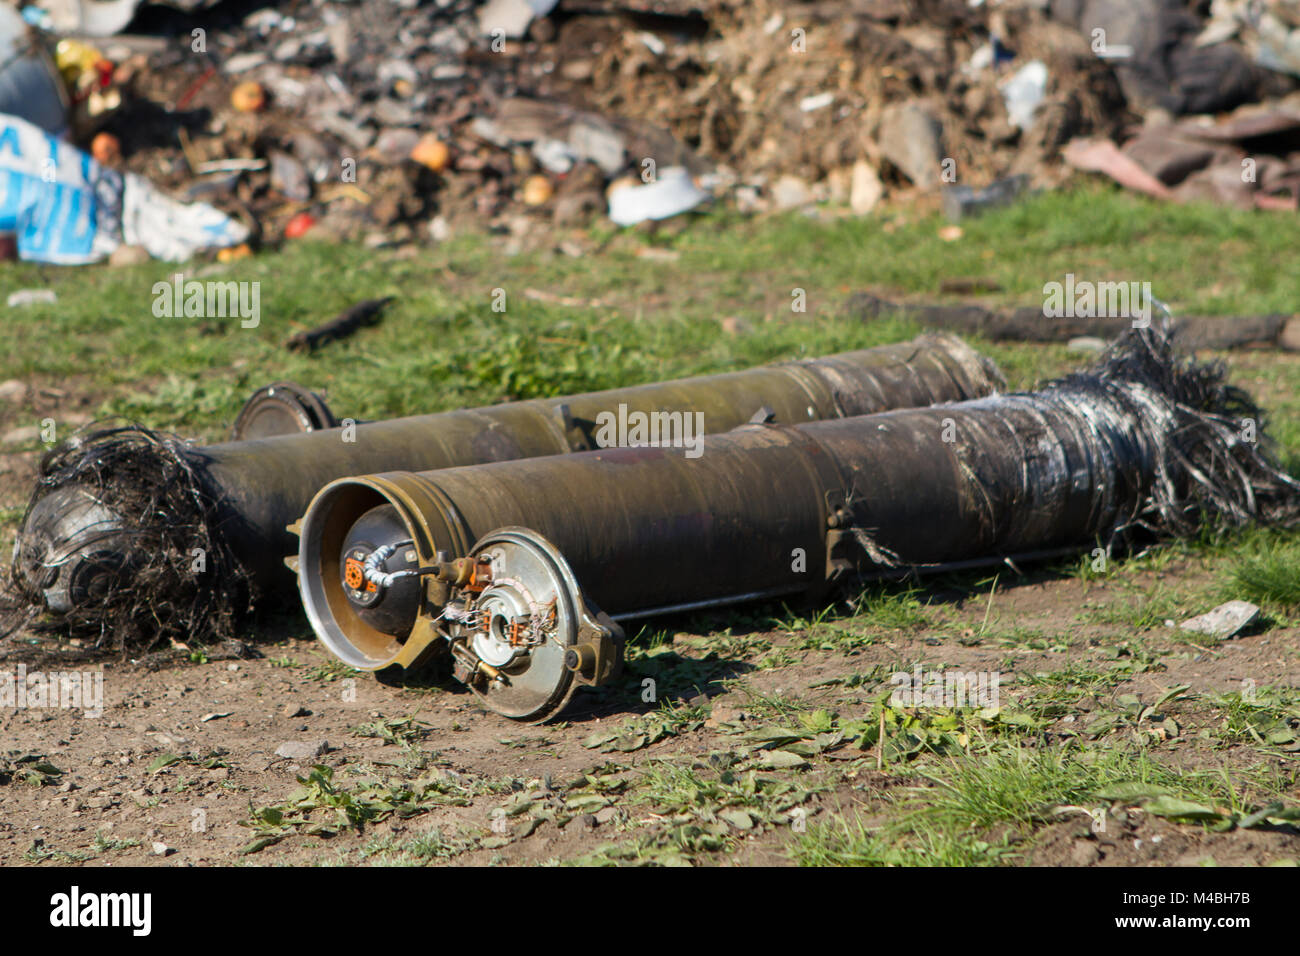 unexploded ordnance from multiple rocket launchers Stock Photo